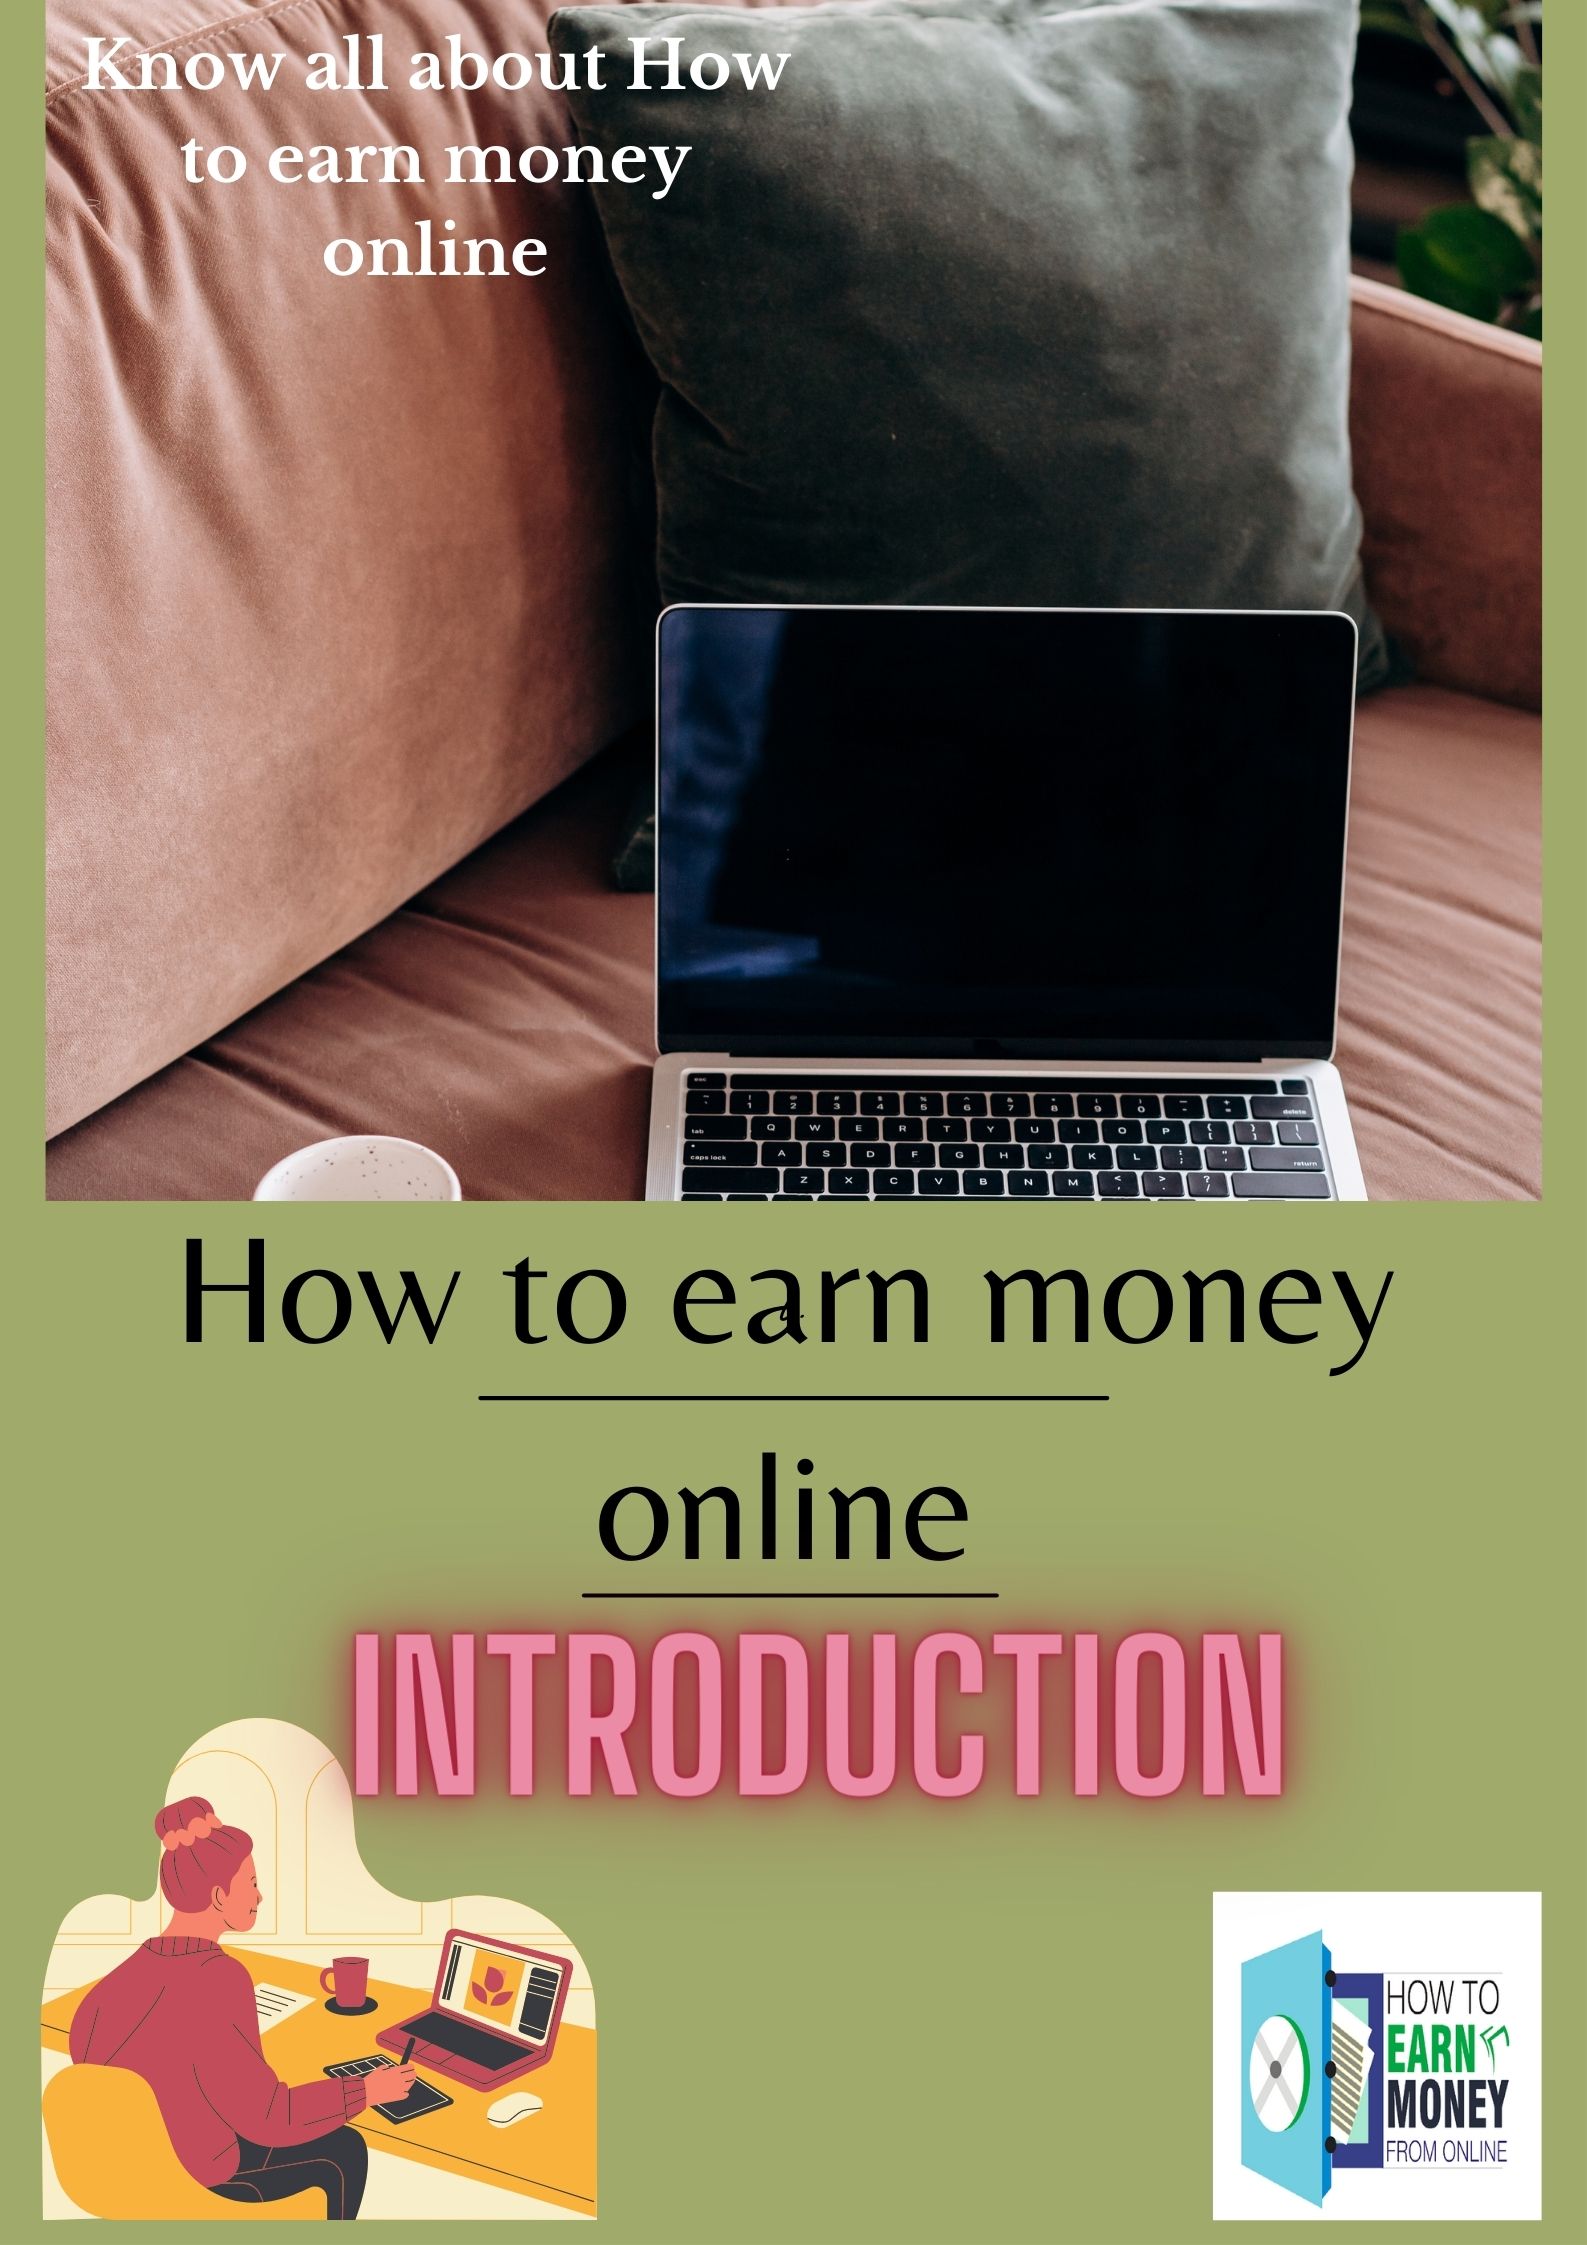 Introduction(How to earn money online)